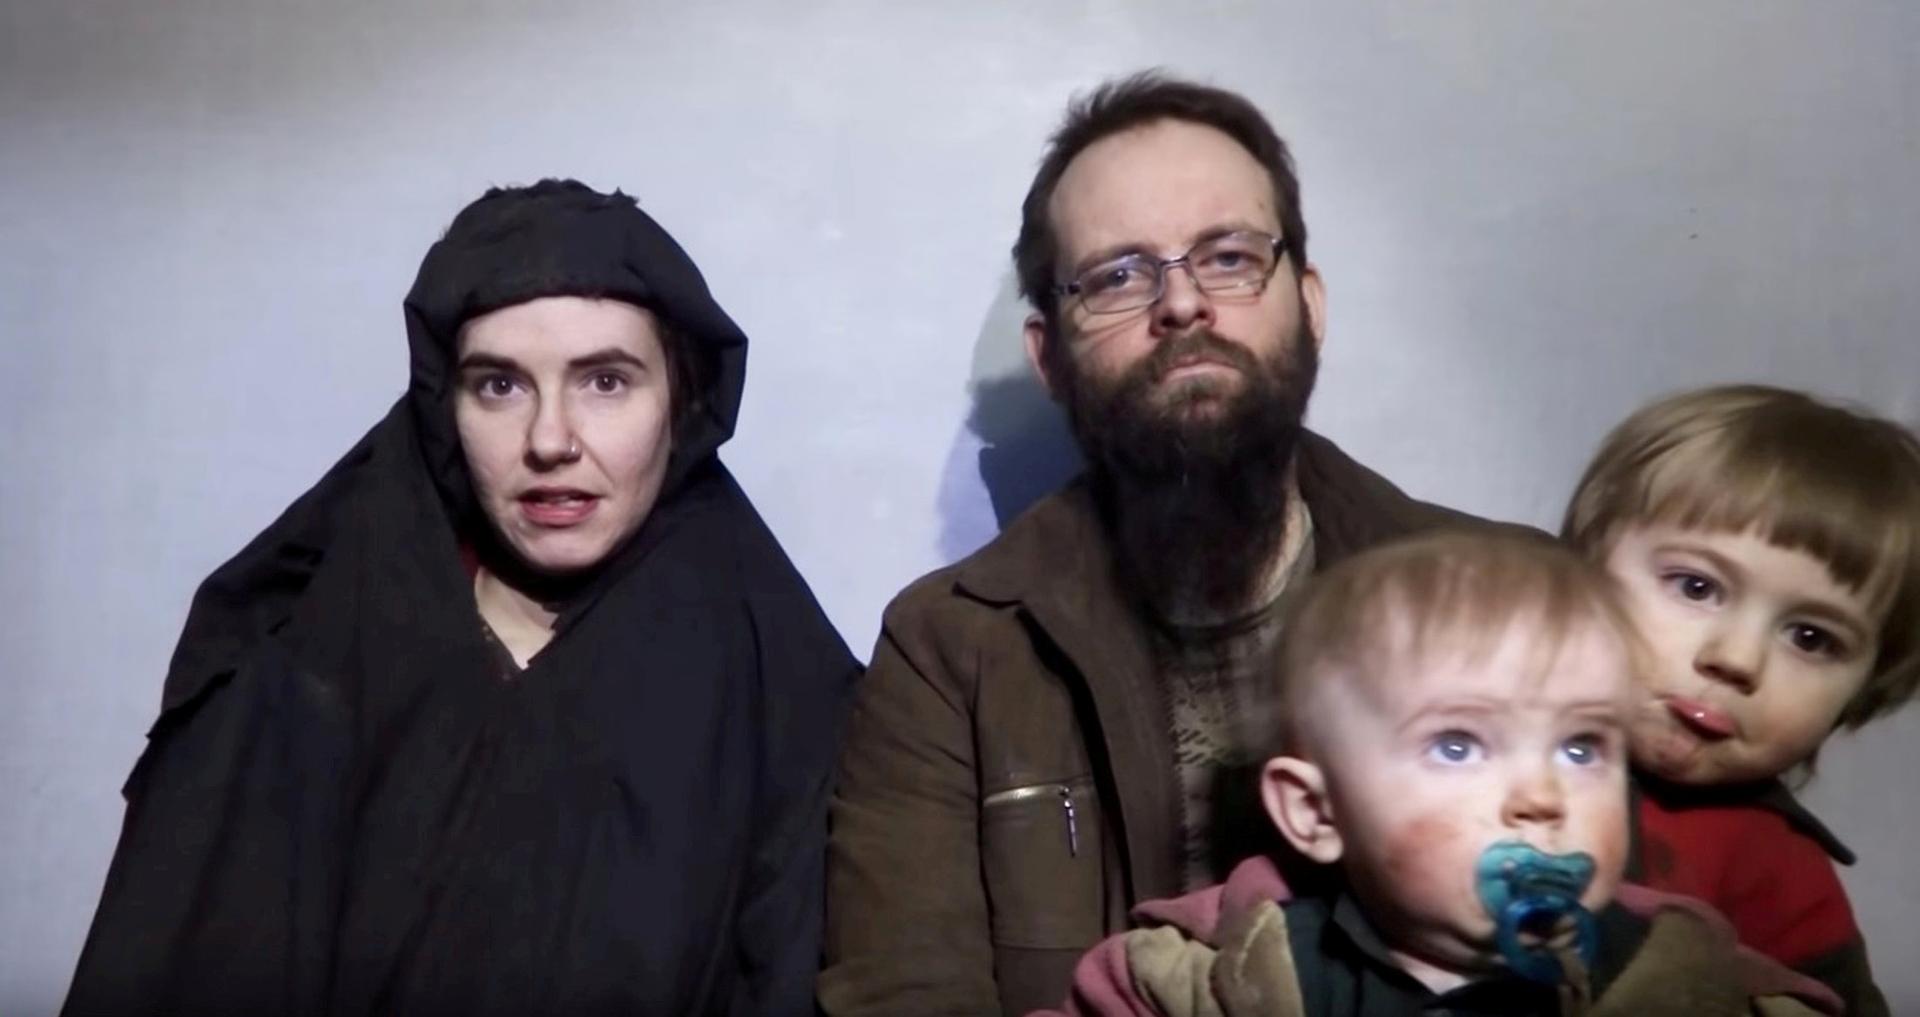 A still image from a video posted by the Taliban on social media on Dec. 19, 2016, shows American Caitlan Coleman, left, speaking next to her Canadian husband Joshua Boyle and their sons.